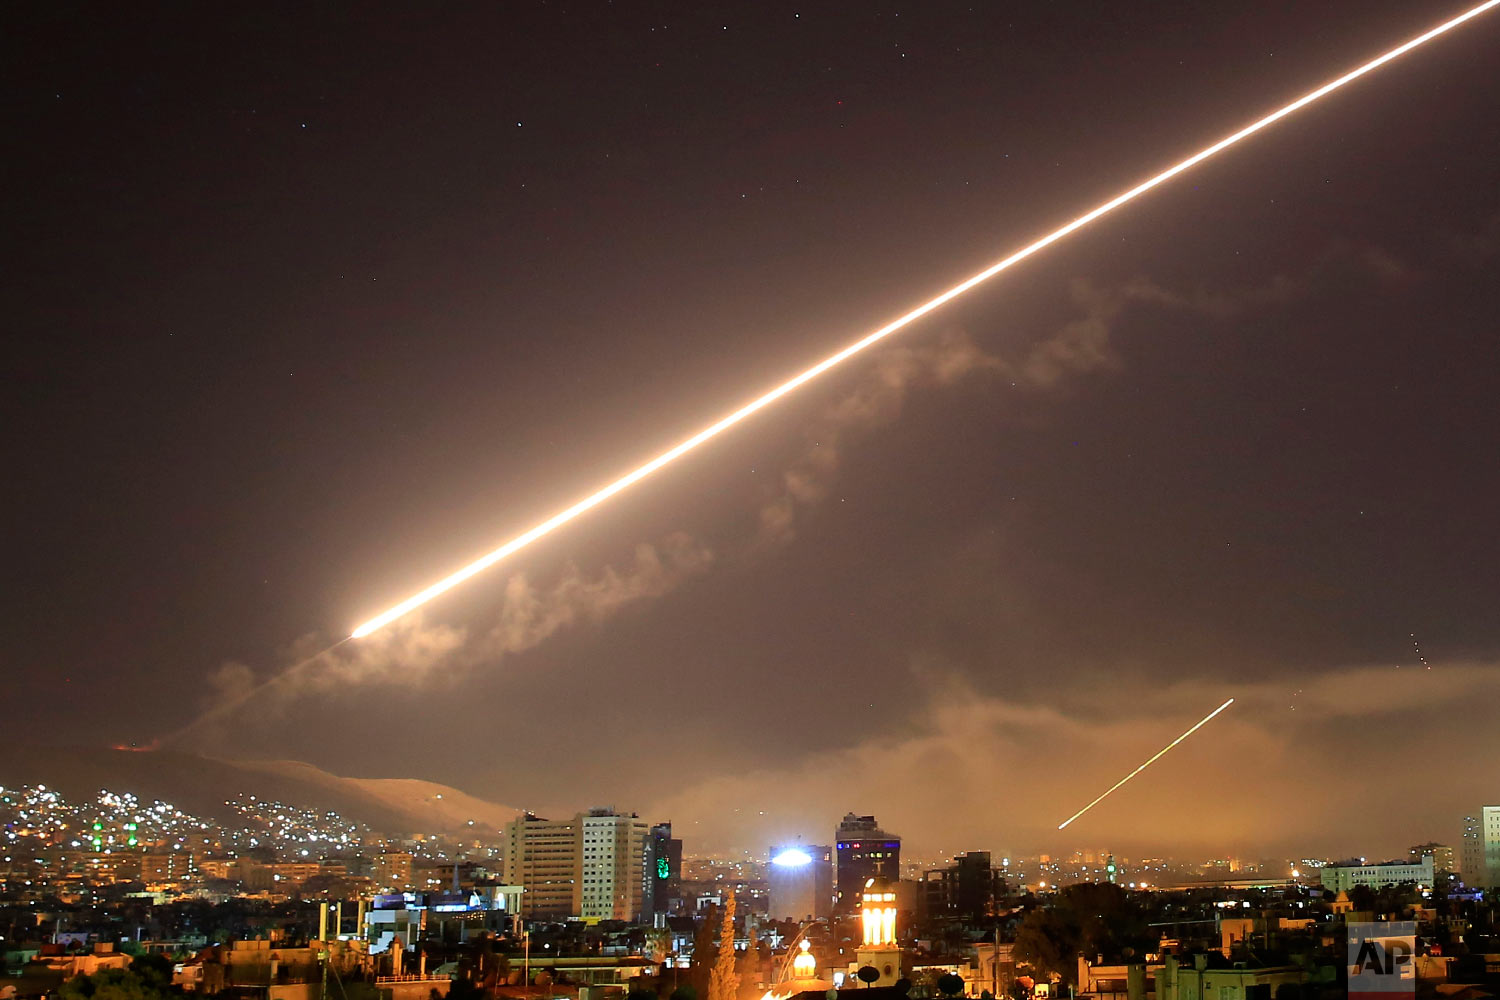  Surface to air missile fire lights up the sky over Damascus at the U.S. launches an attack on Syria early on April 14, 2018. U.S. President Donald Trump ordered the airstrikes in retaliation for Syria's alleged use of chemical weapons. (AP Photo/Has